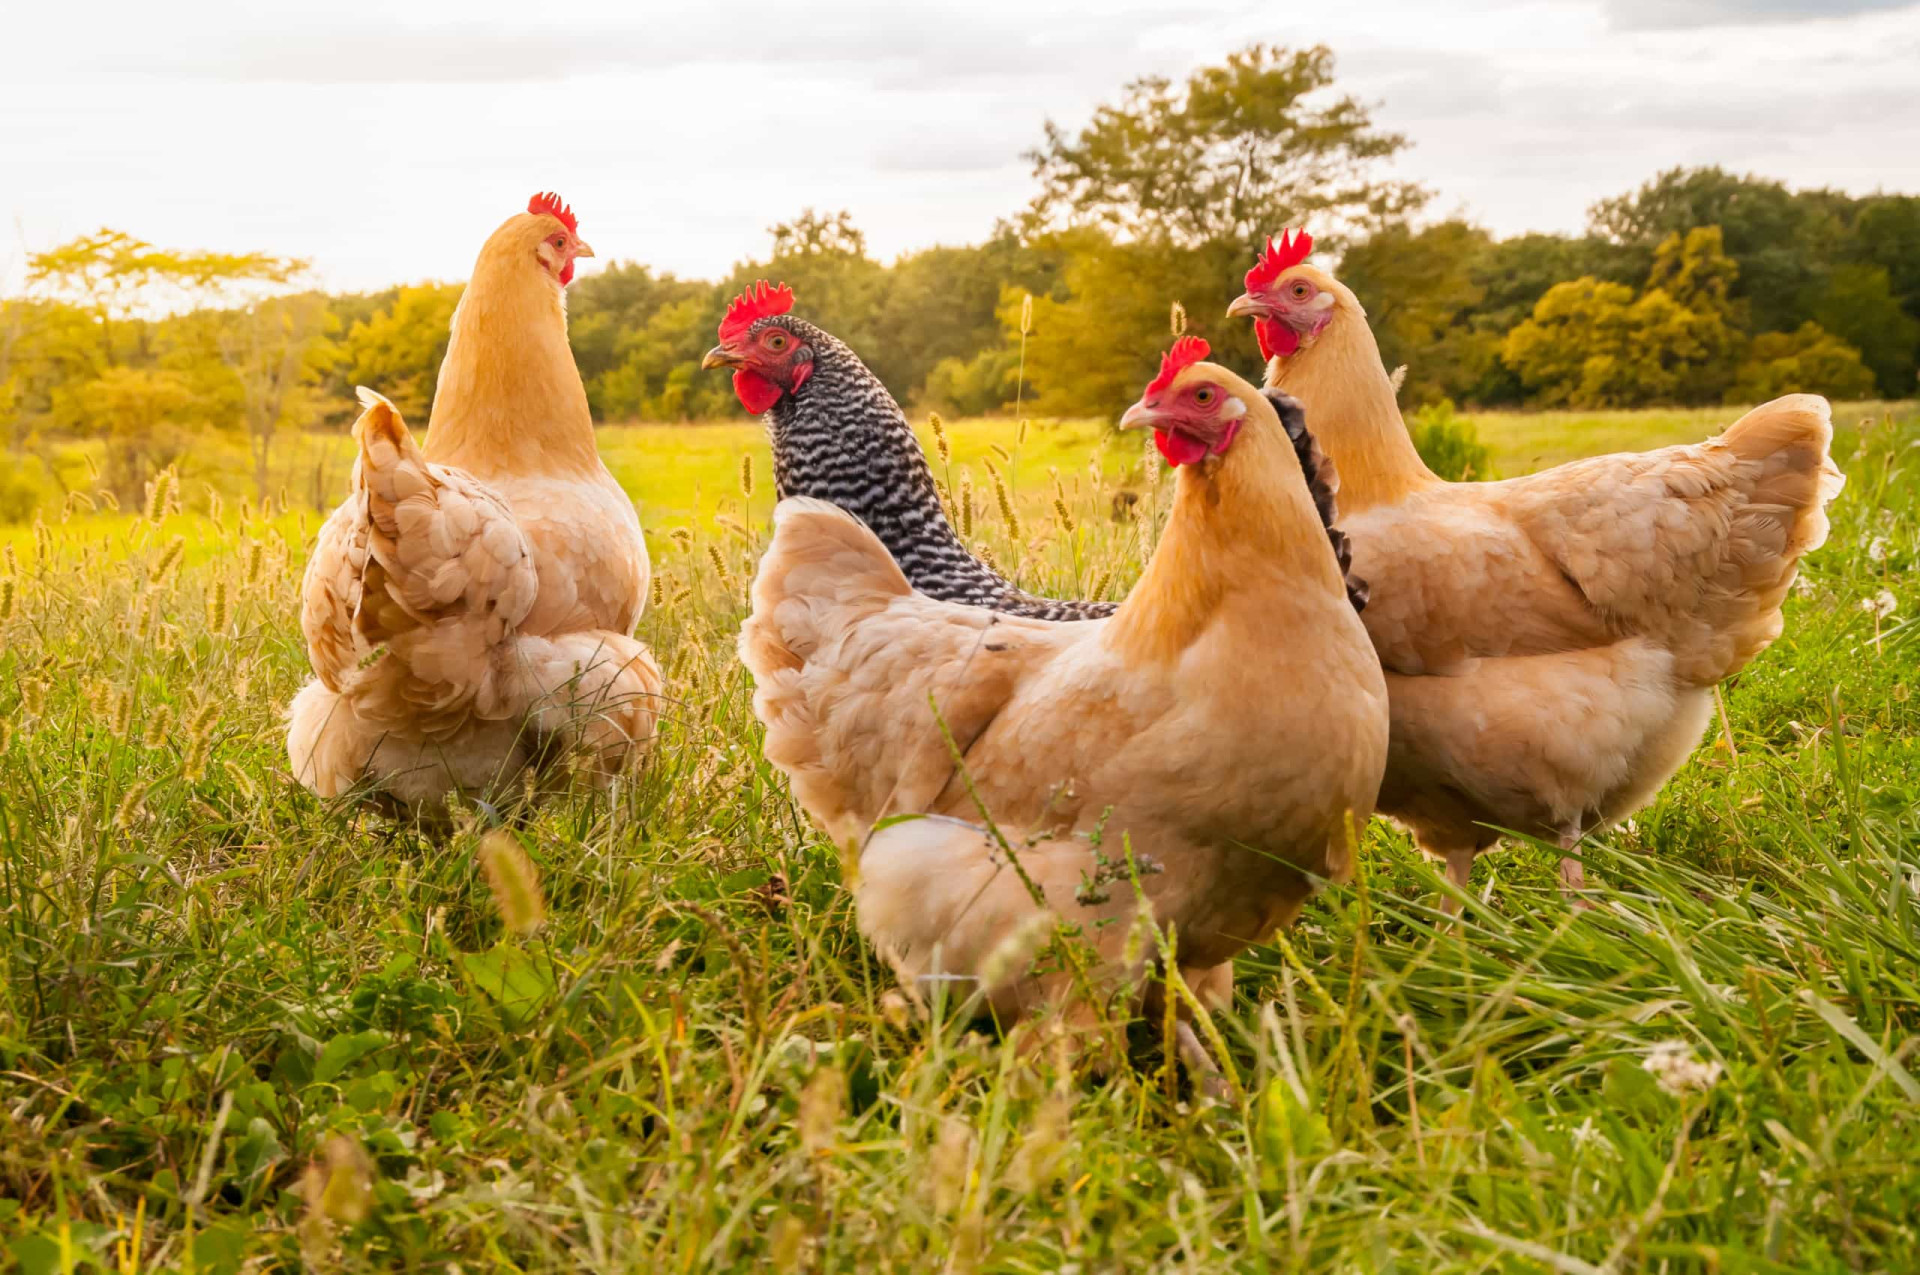 Apparently, chickens prefer "faces consistent with human sexual preferences."<p><a href="https://www.msn.com/en-au/community/channel/vid-7xx8mnucu55yw63we9va2gwr7uihbxwc68fxqp25x6tg4ftibpra?cvid=94631541bc0f4f89bfd59158d696ad7e">Follow us and access great exclusive content every day</a></p>